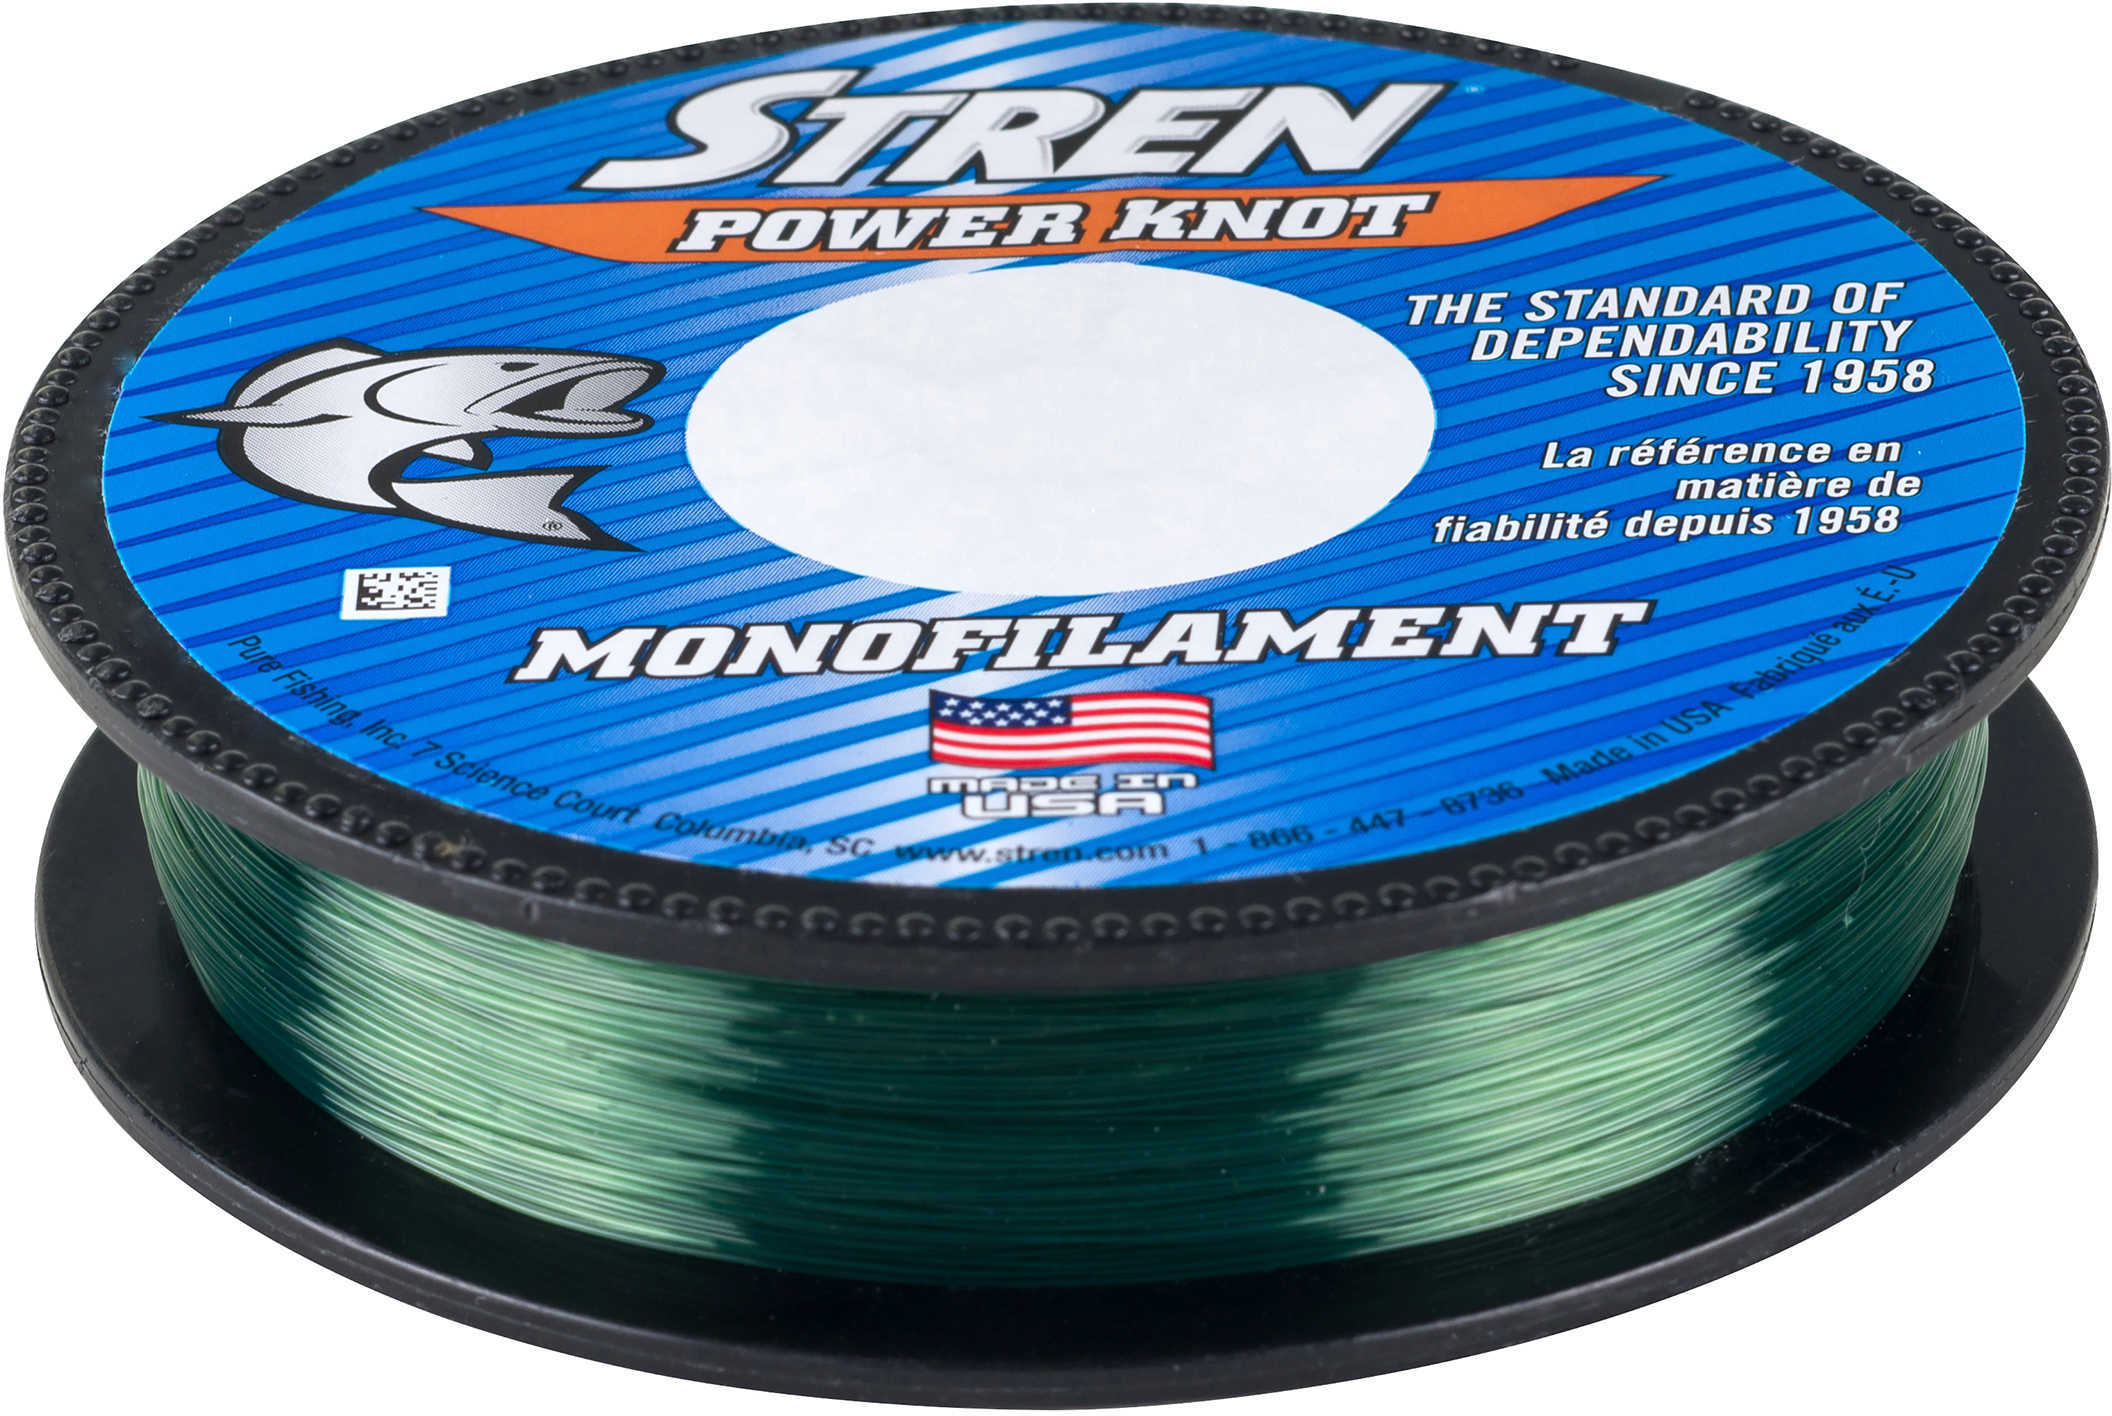 Power Knot 220 Yards , 6 lbs Strength, 0.010", Lo-Vis Green Md: 1367559